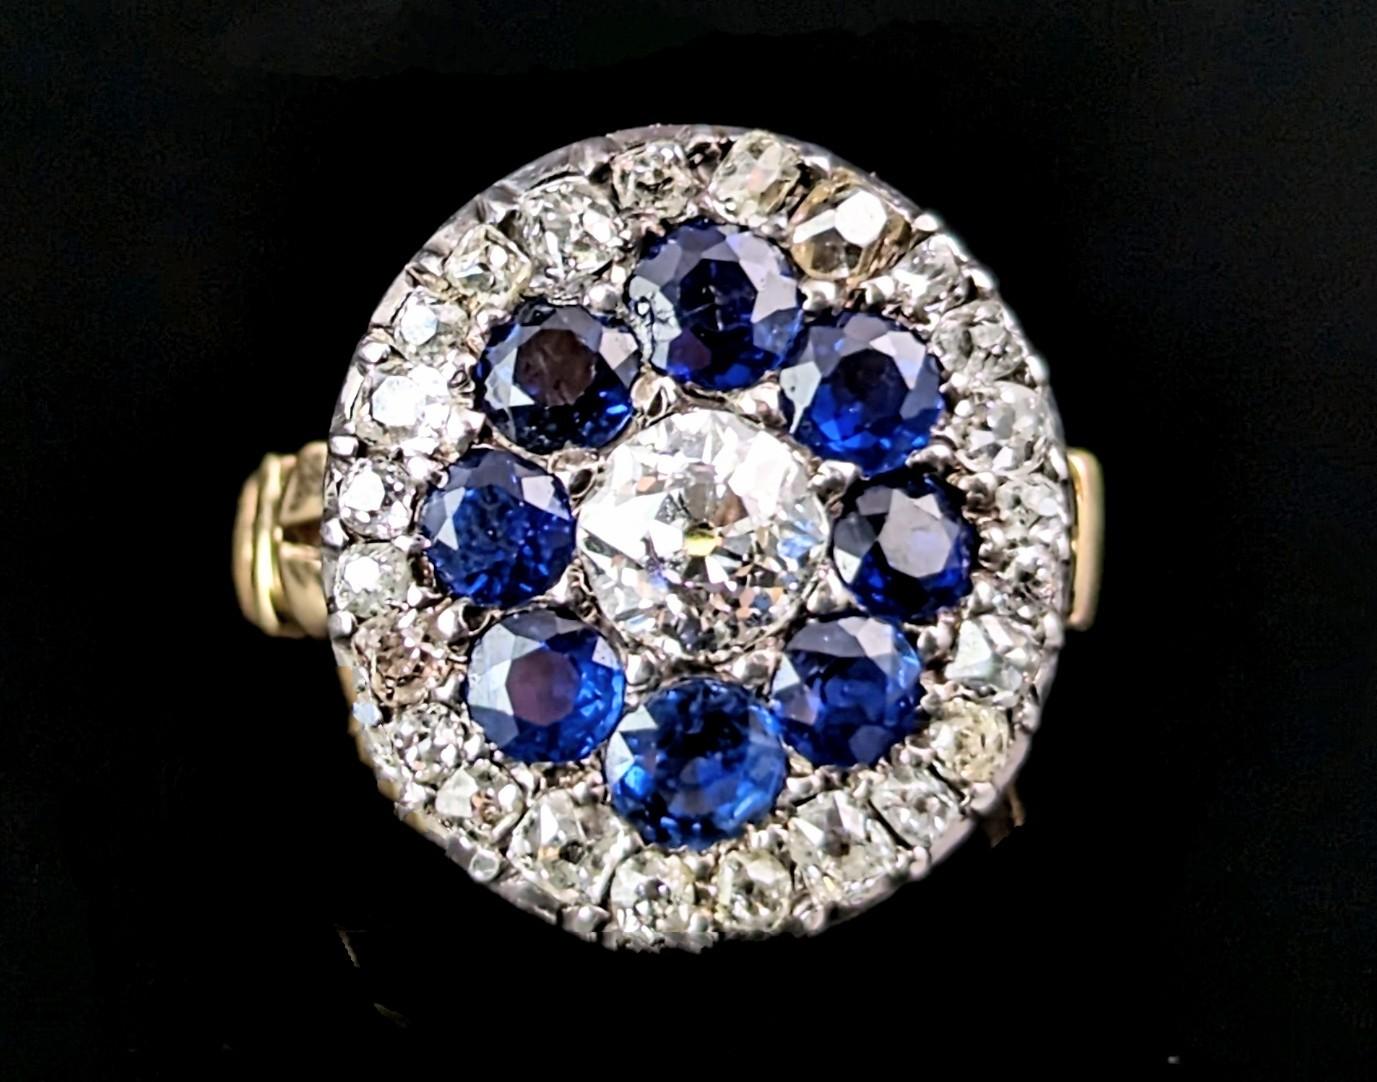 This antique Sapphire and Diamond halo cluster or target ring is truly a majestic beauty!

A ring fit for royalty this piece has so much sparkle and shimmer with old cut and cushion cut diamonds and those beautiful deep royal blue sapphires, there